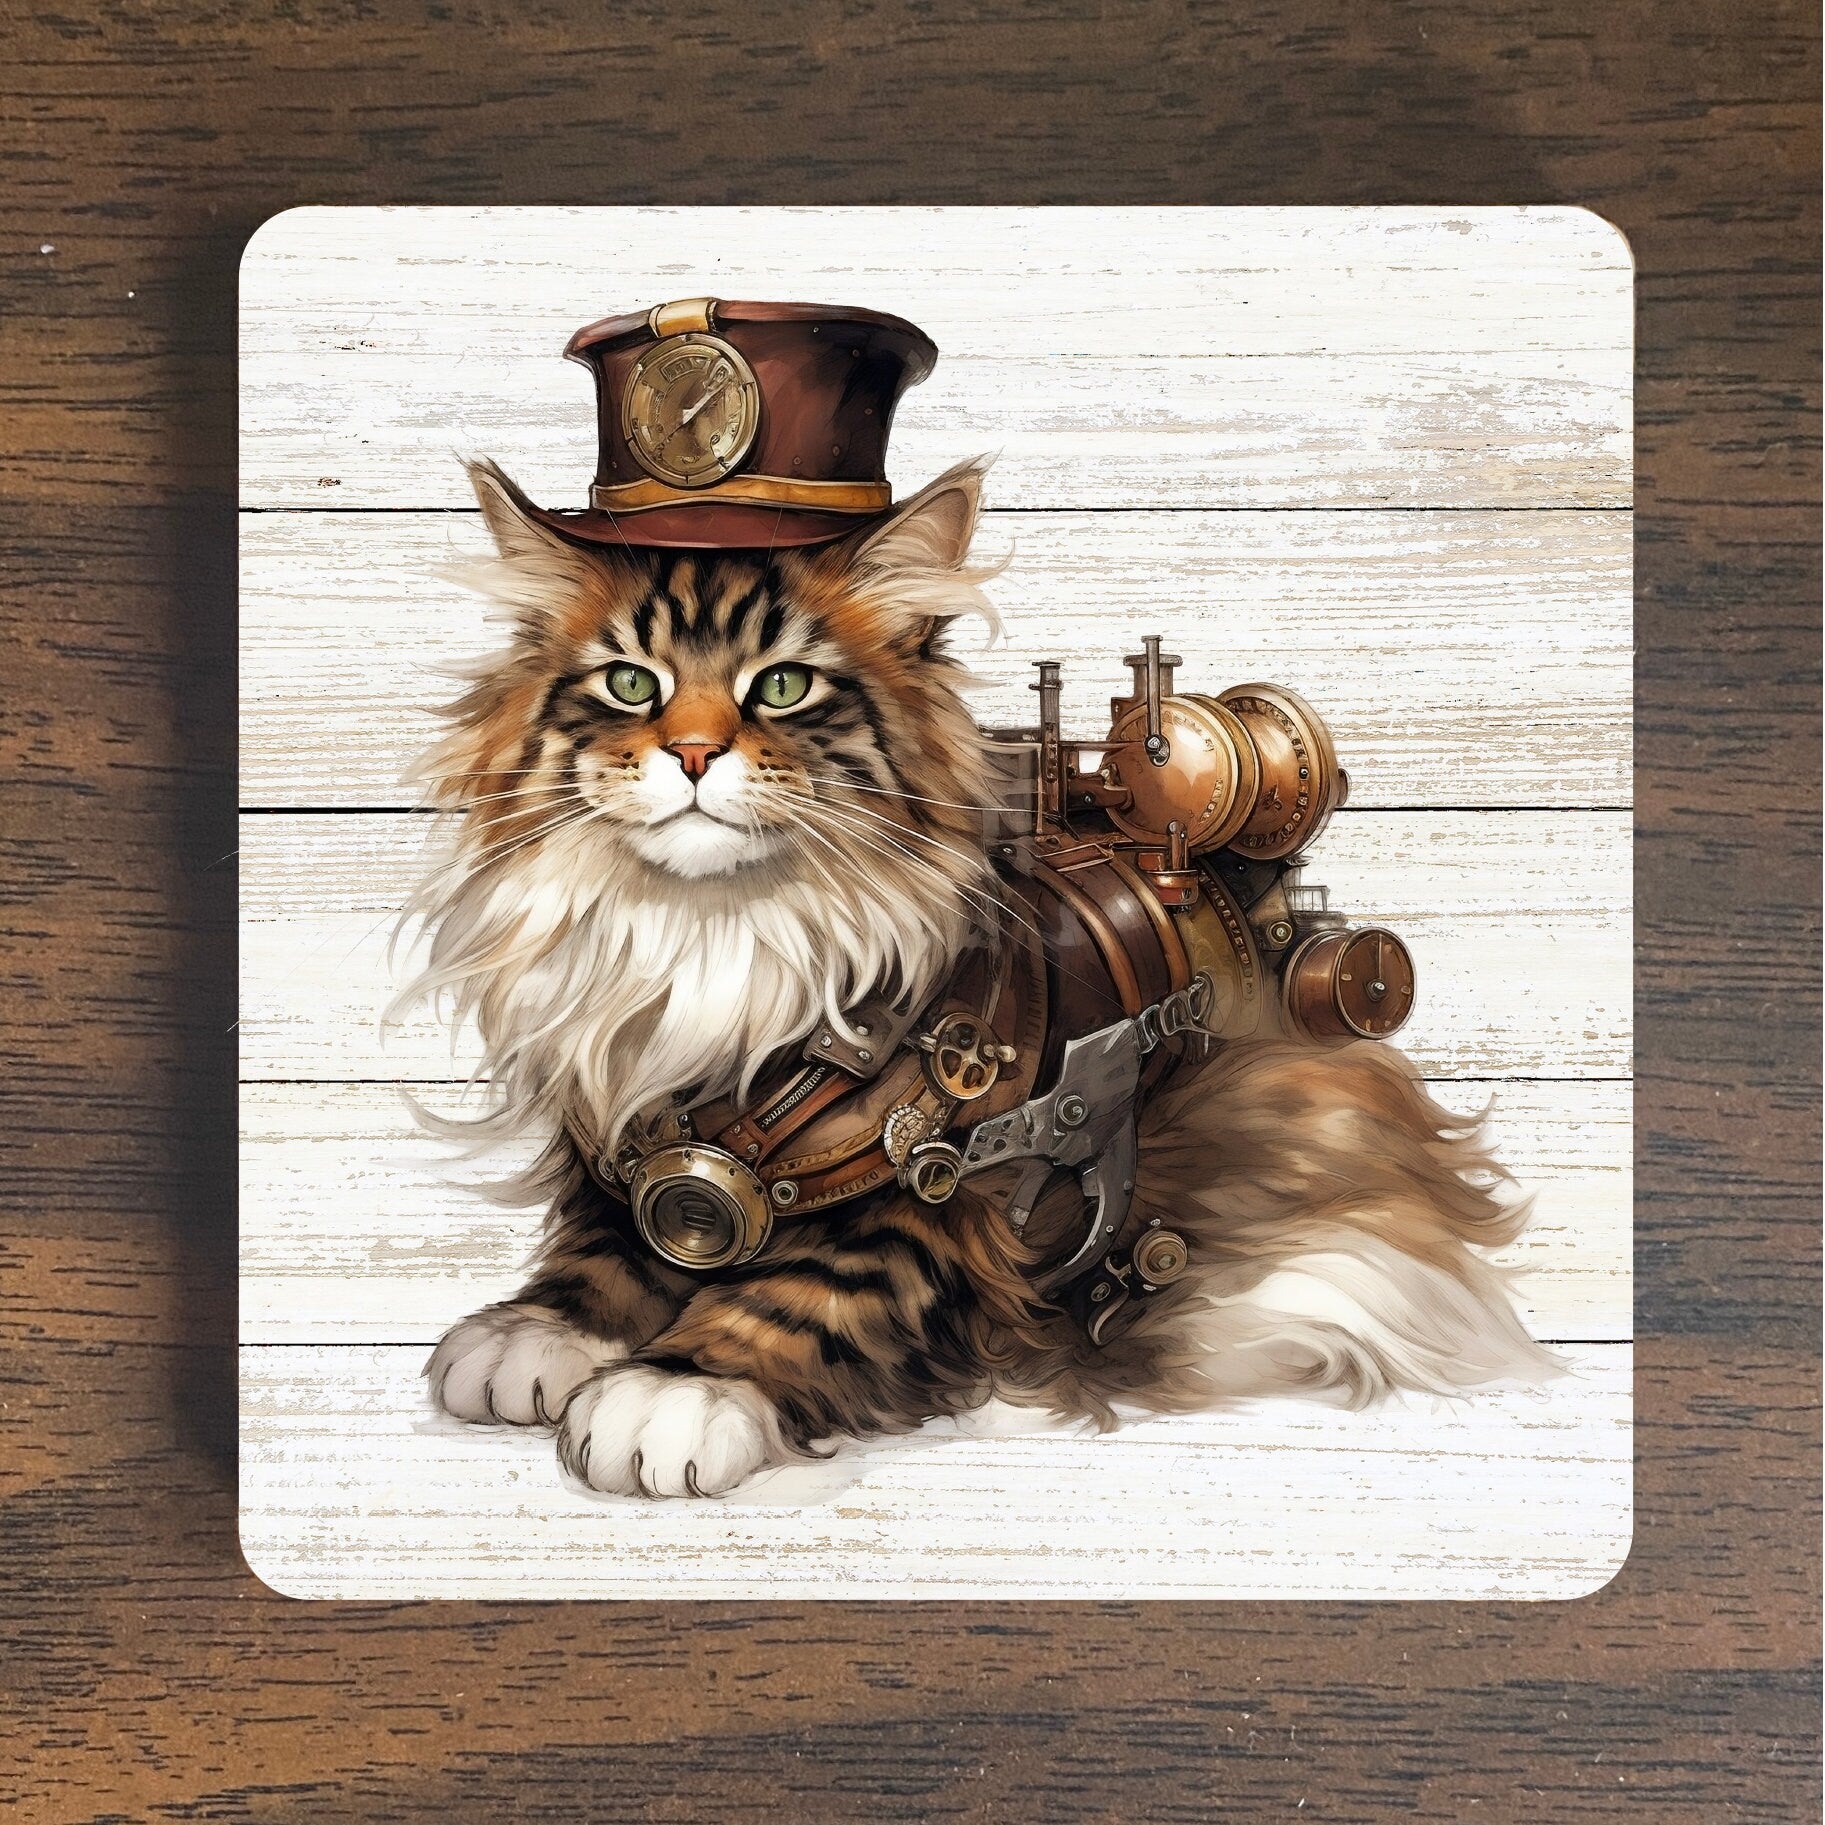 Steampunk Whiskered Wonder Magnet - Enchanting Maine Coon Cat with Industrial Flair - Maine Coone Magnet - Maine Coon Steampunk Magnet